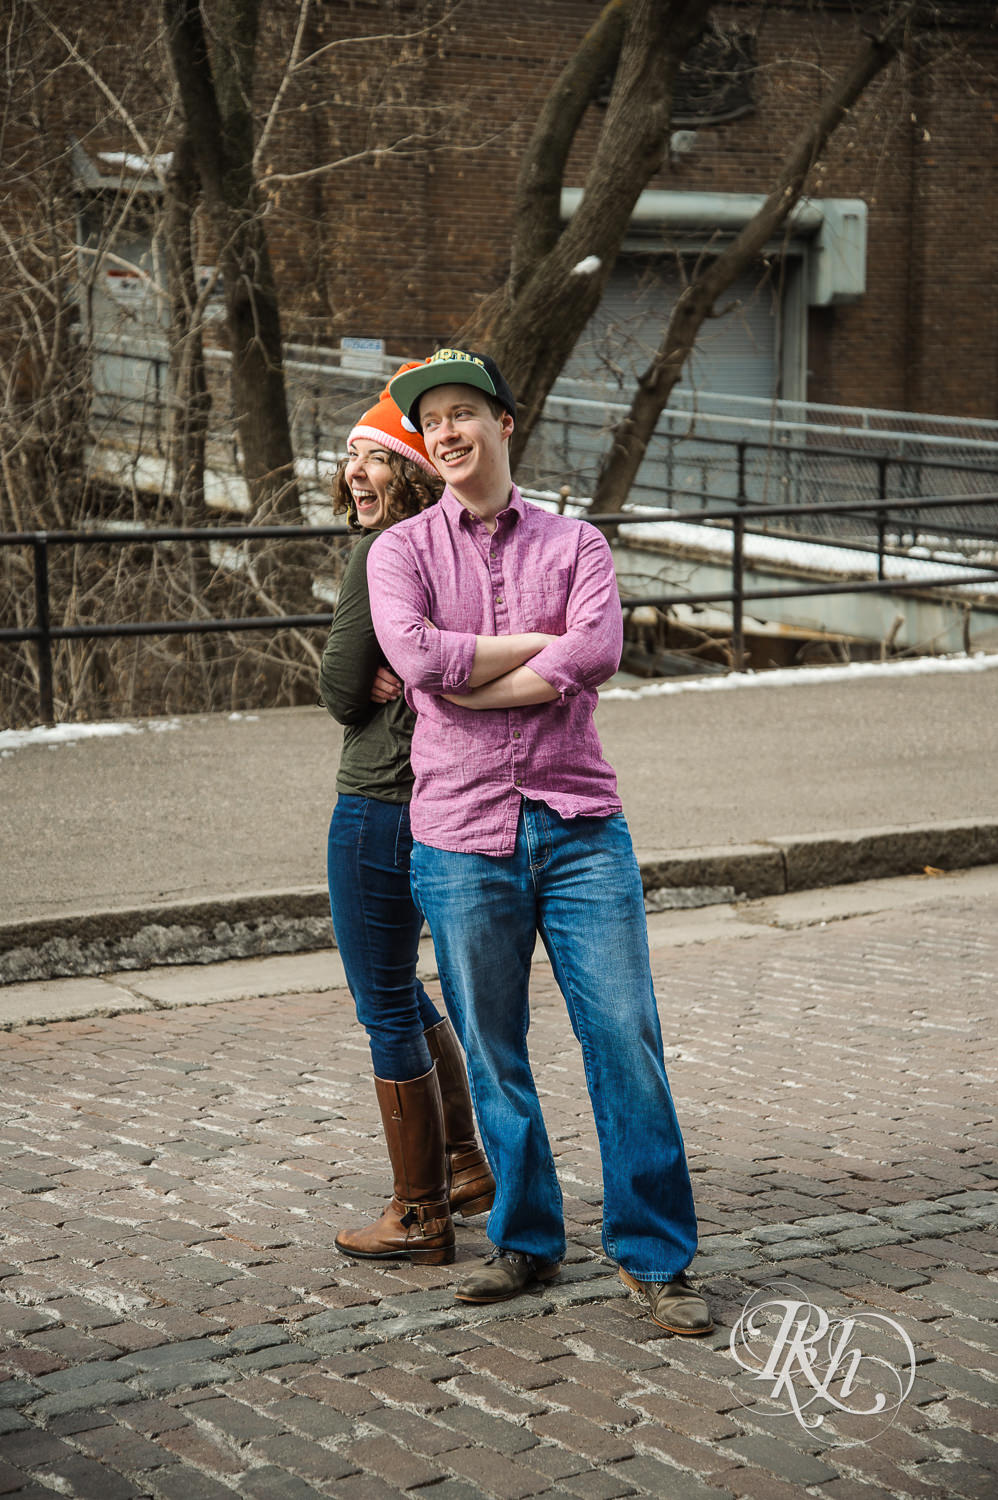 Man and woman laugh in the road wearing Pokemon hats in Minneapolis, Minnesota.